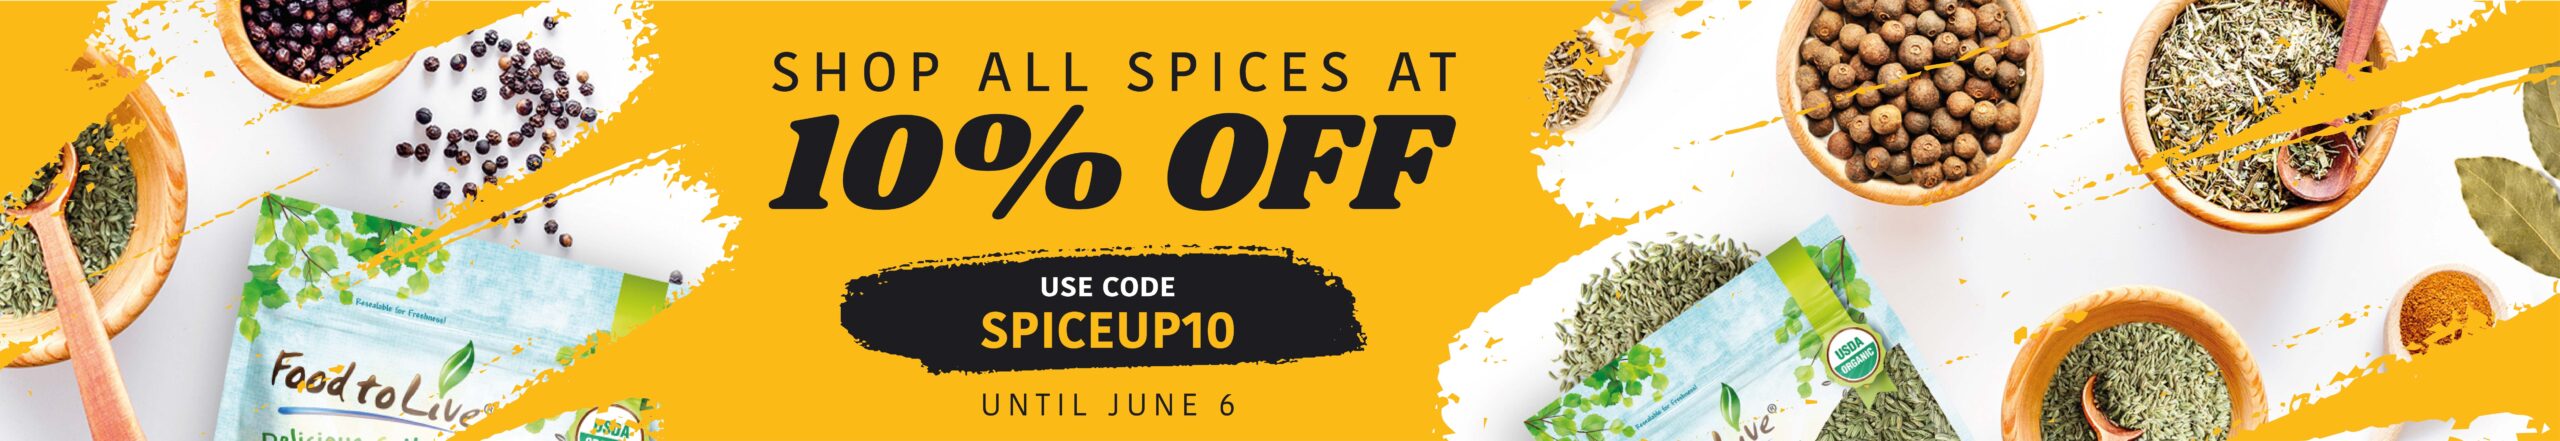 10% OFF ALL SPICES USE CODE SPICEUP10 AT CHECKOUT